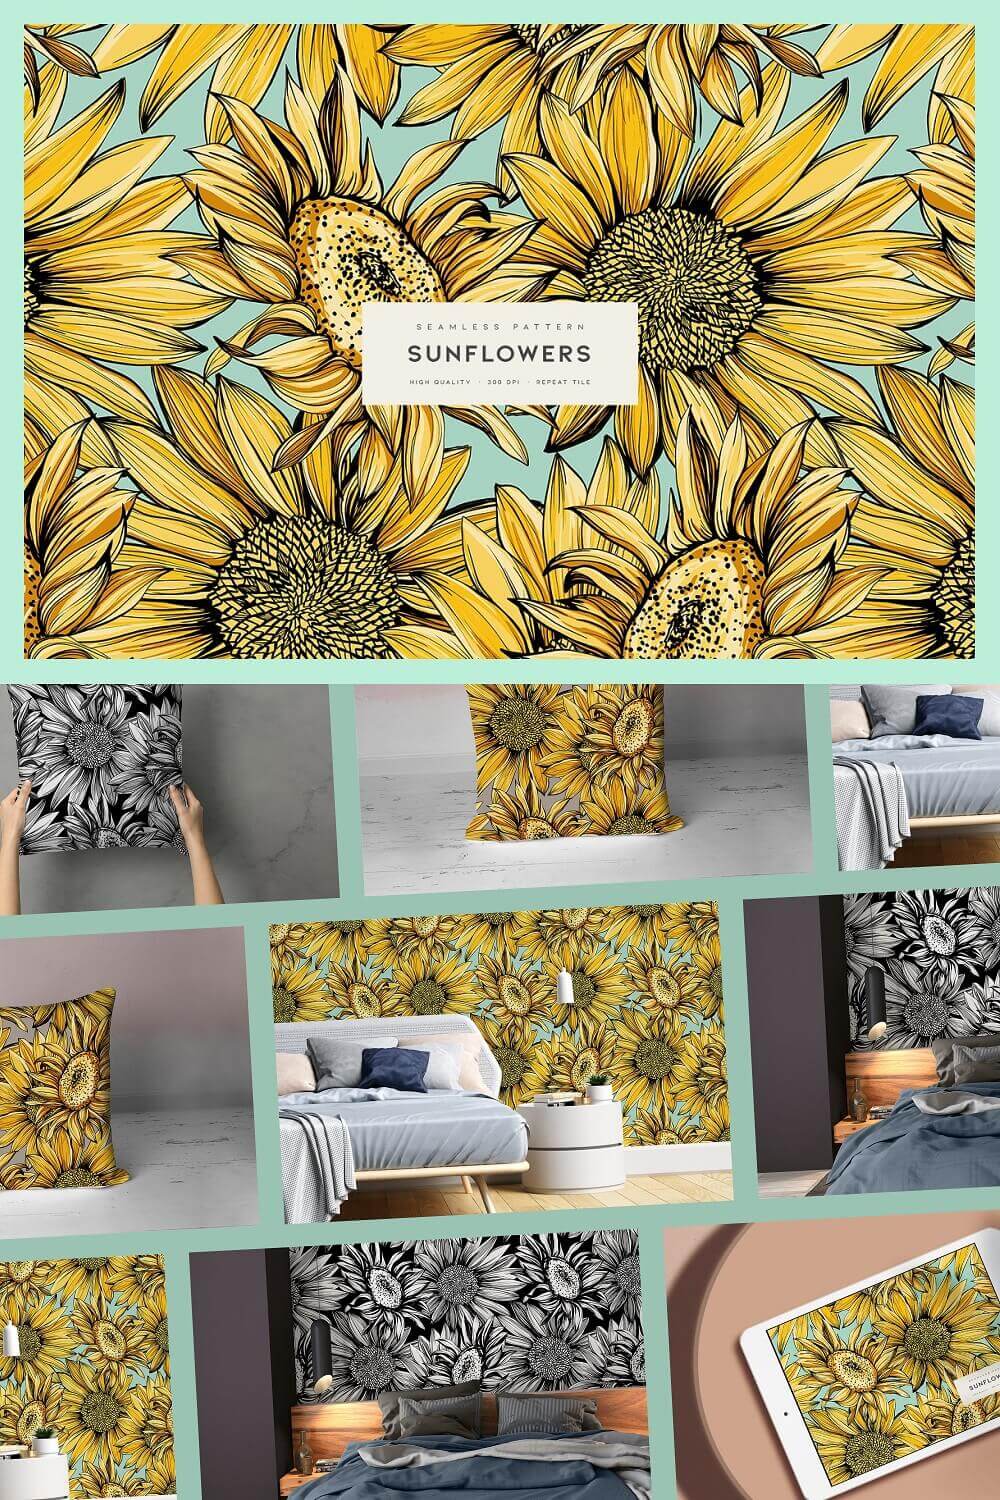 Images of sunflowers on household items.